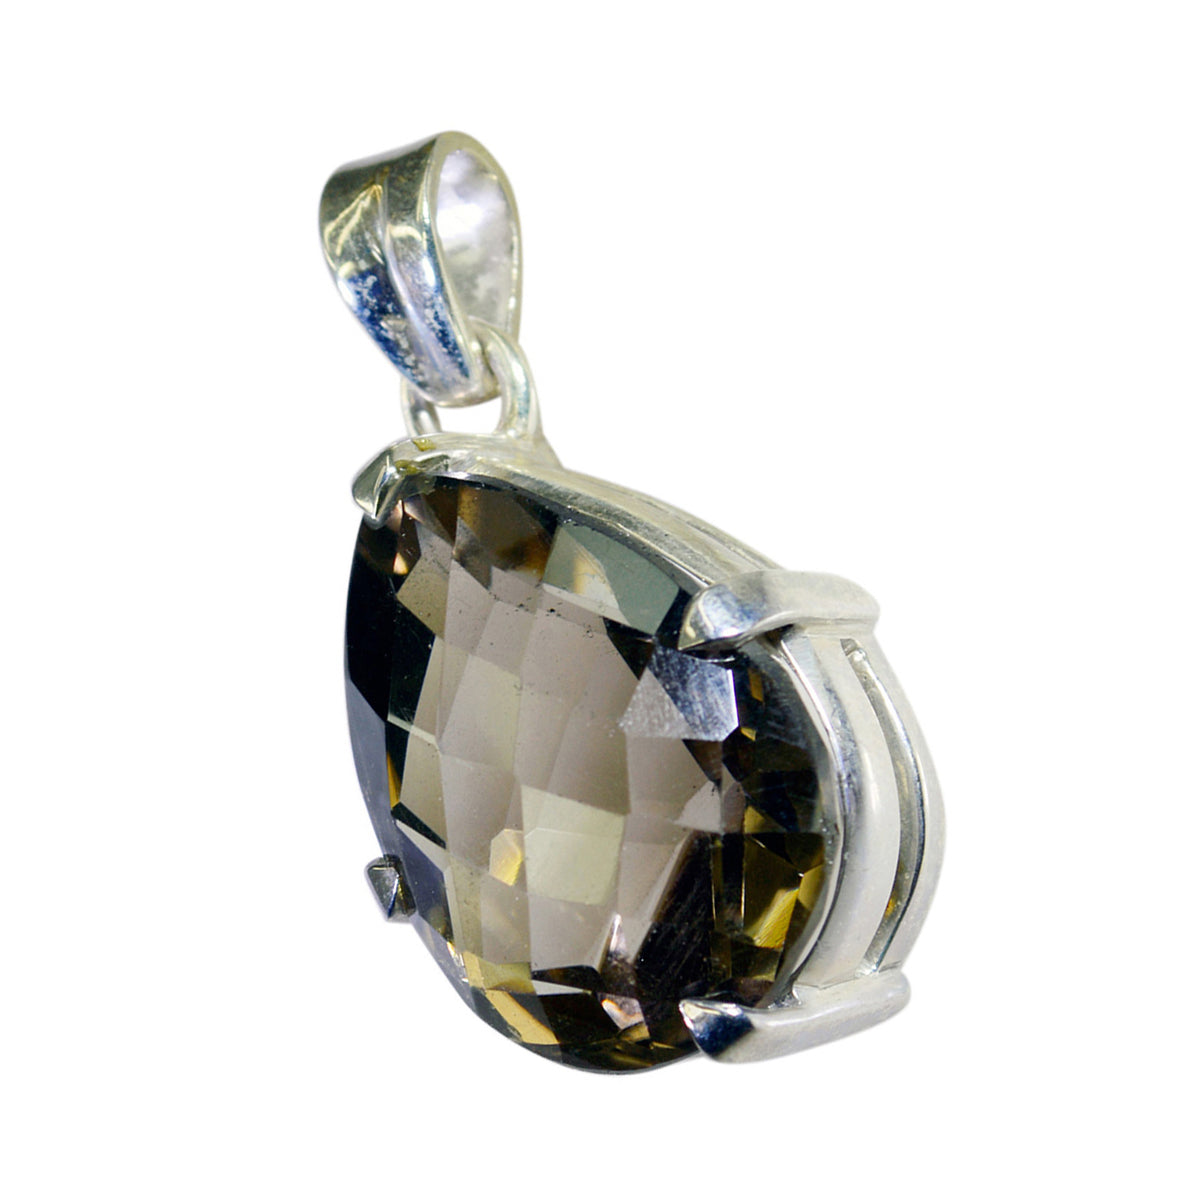 Riyo Comely Gems Pear Checker Brown Smoky Quartz Solid Silver Pendant Gift For Good Friday